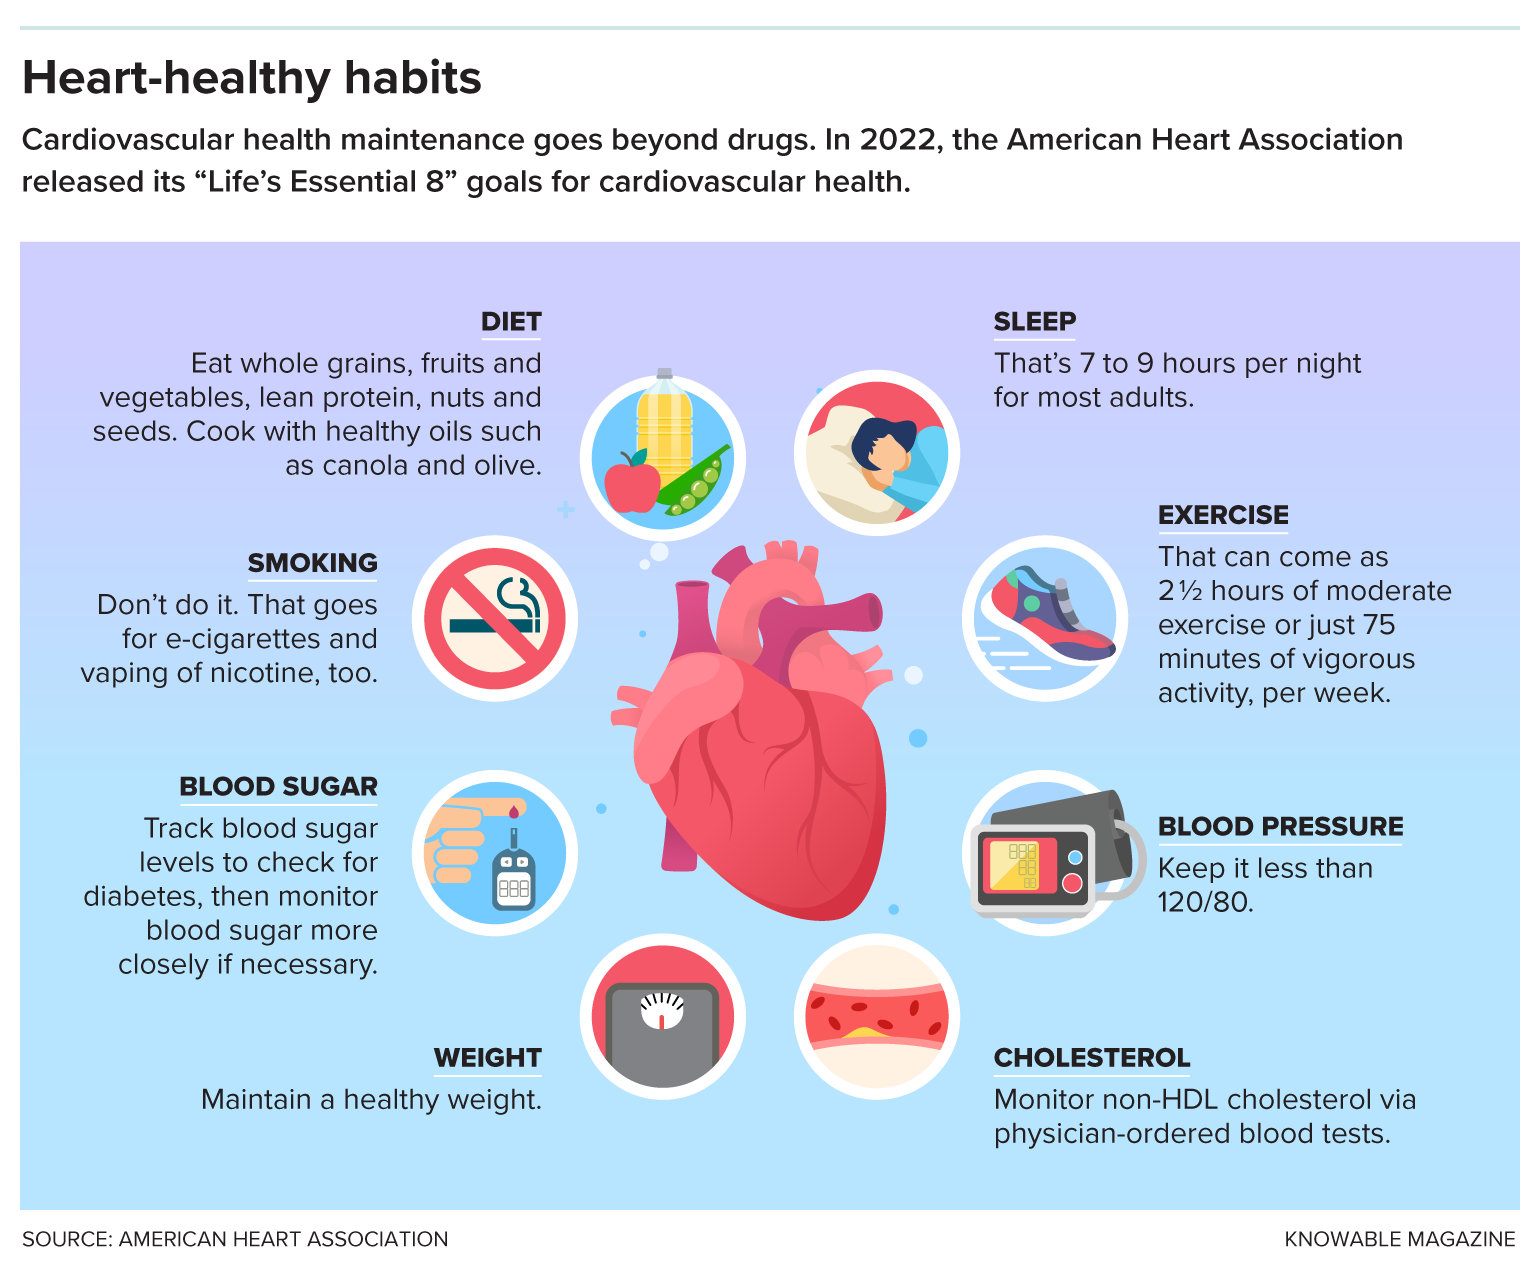 Lifestyle changes can help to reduce the risk of heart disease. Credit: Knowable Magazine